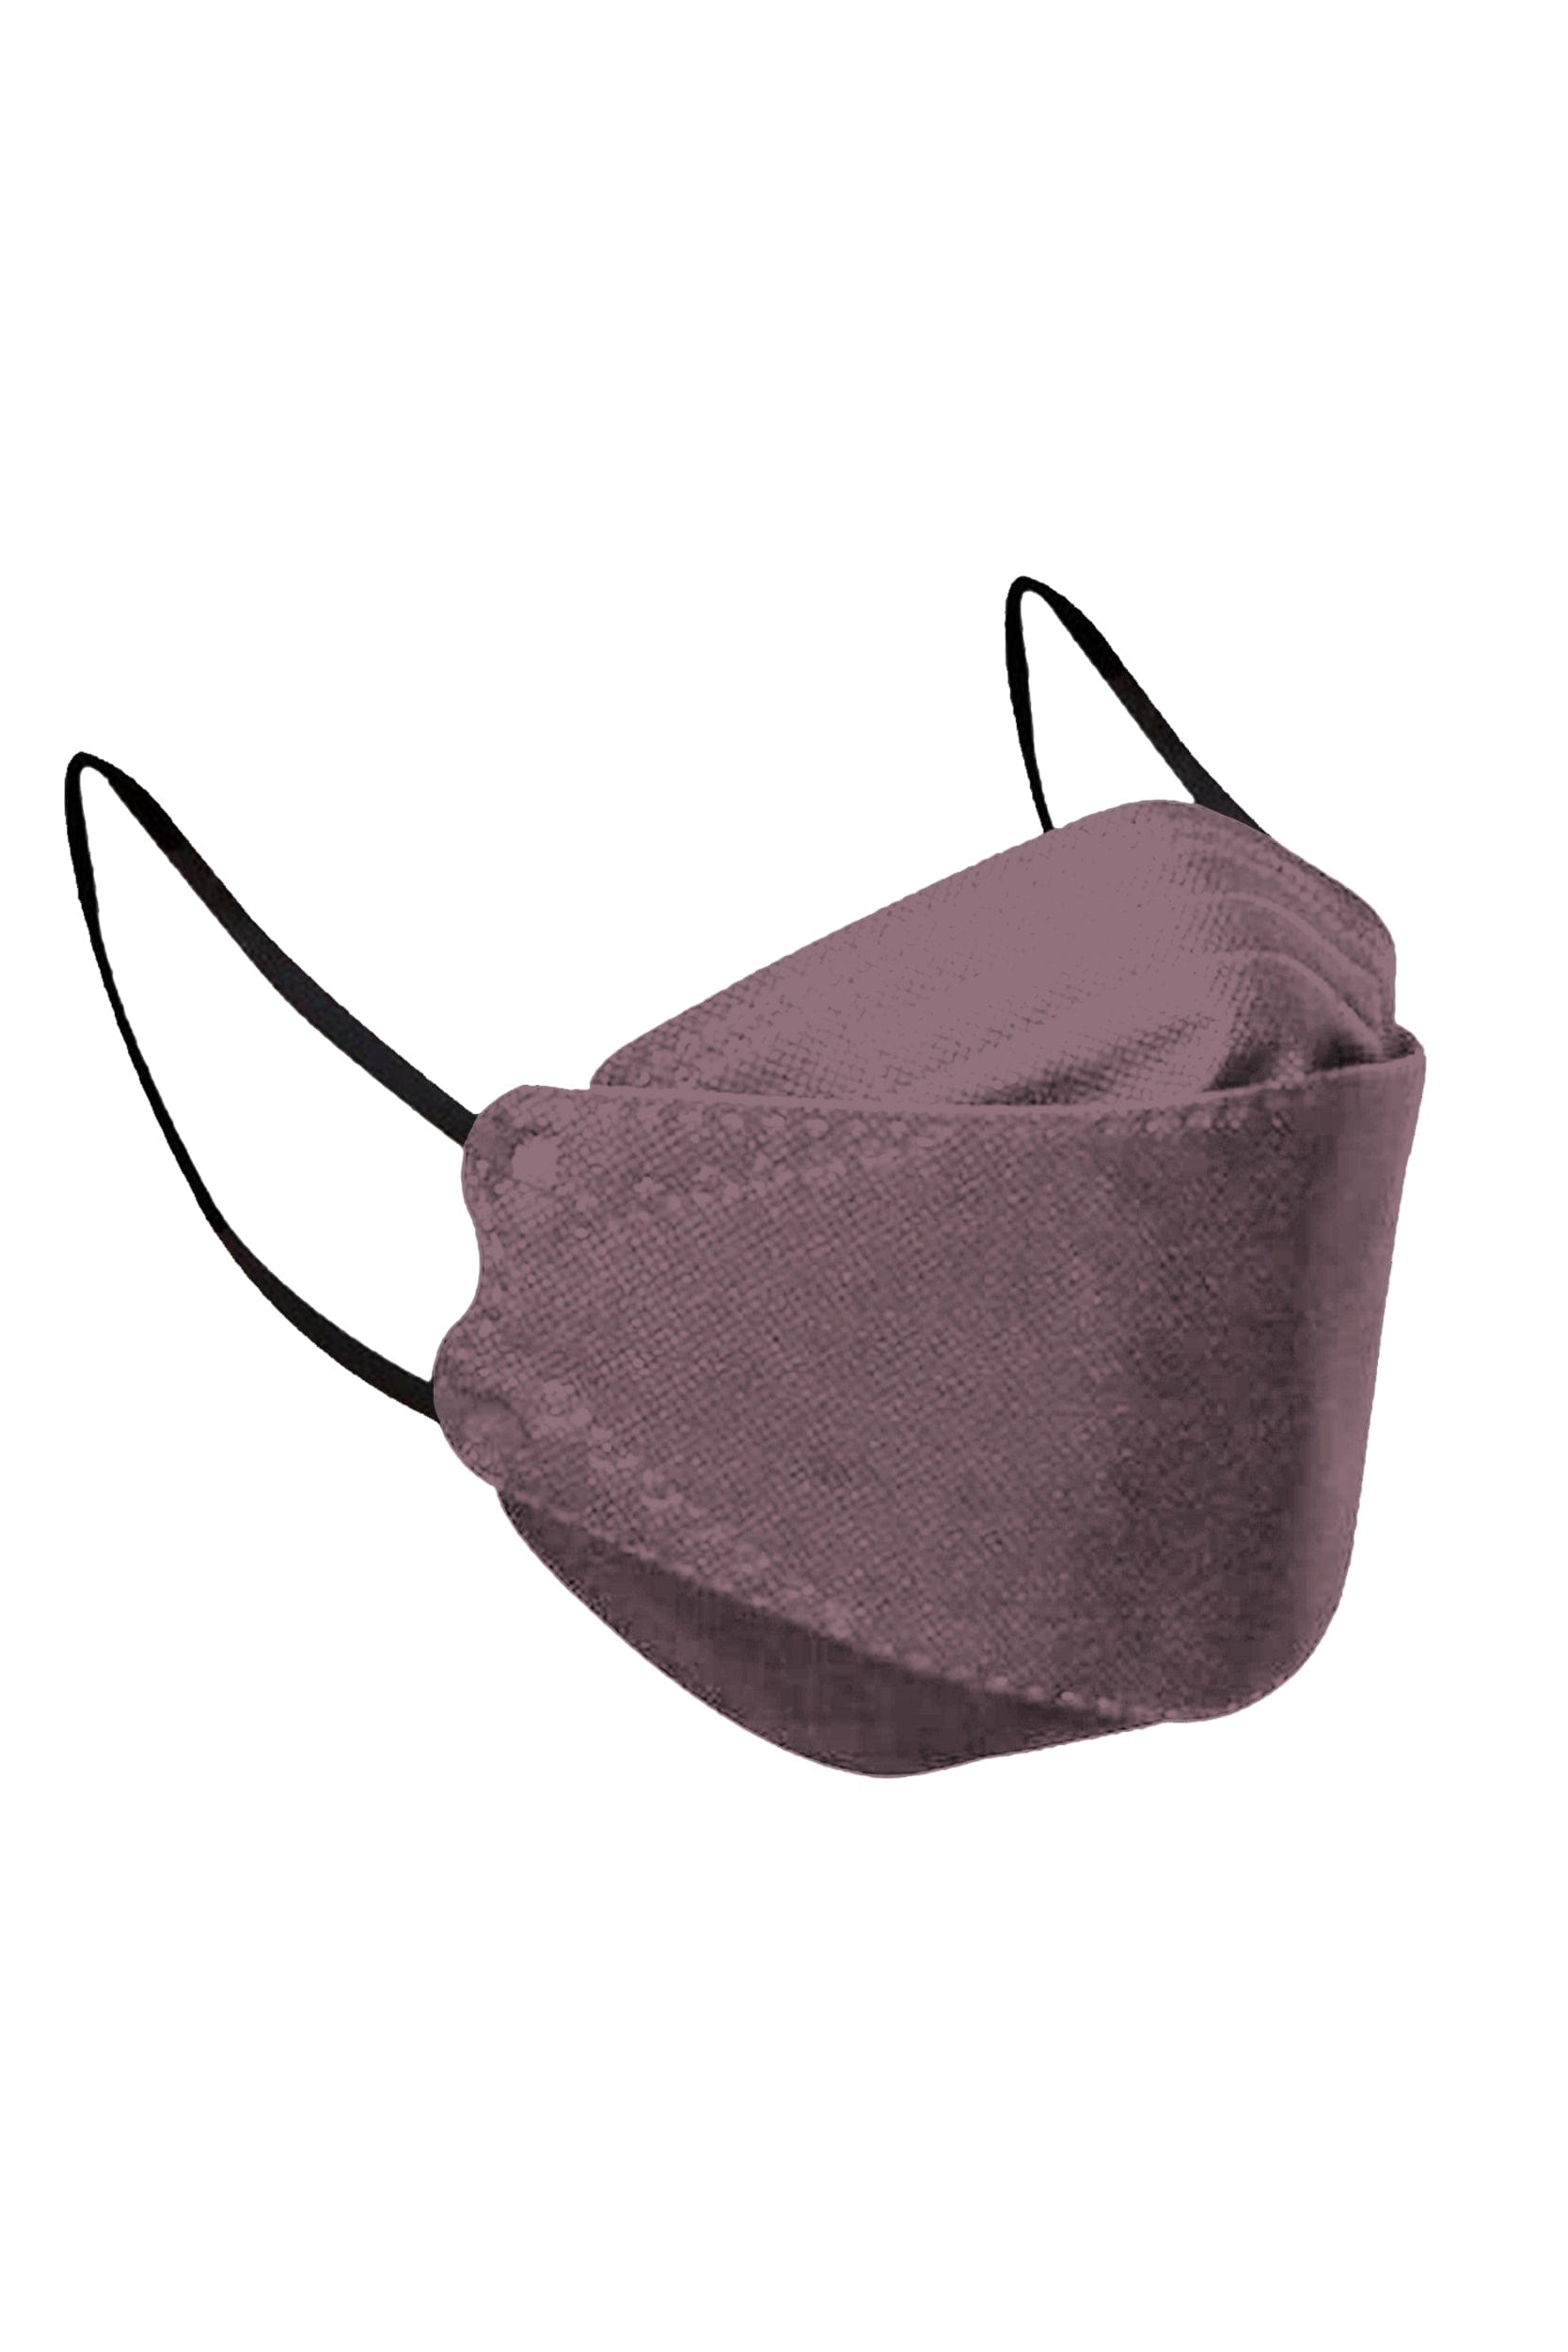 Stylish Dark Purple KF94 face mask, with soft black ear loops and high quality fabric. 